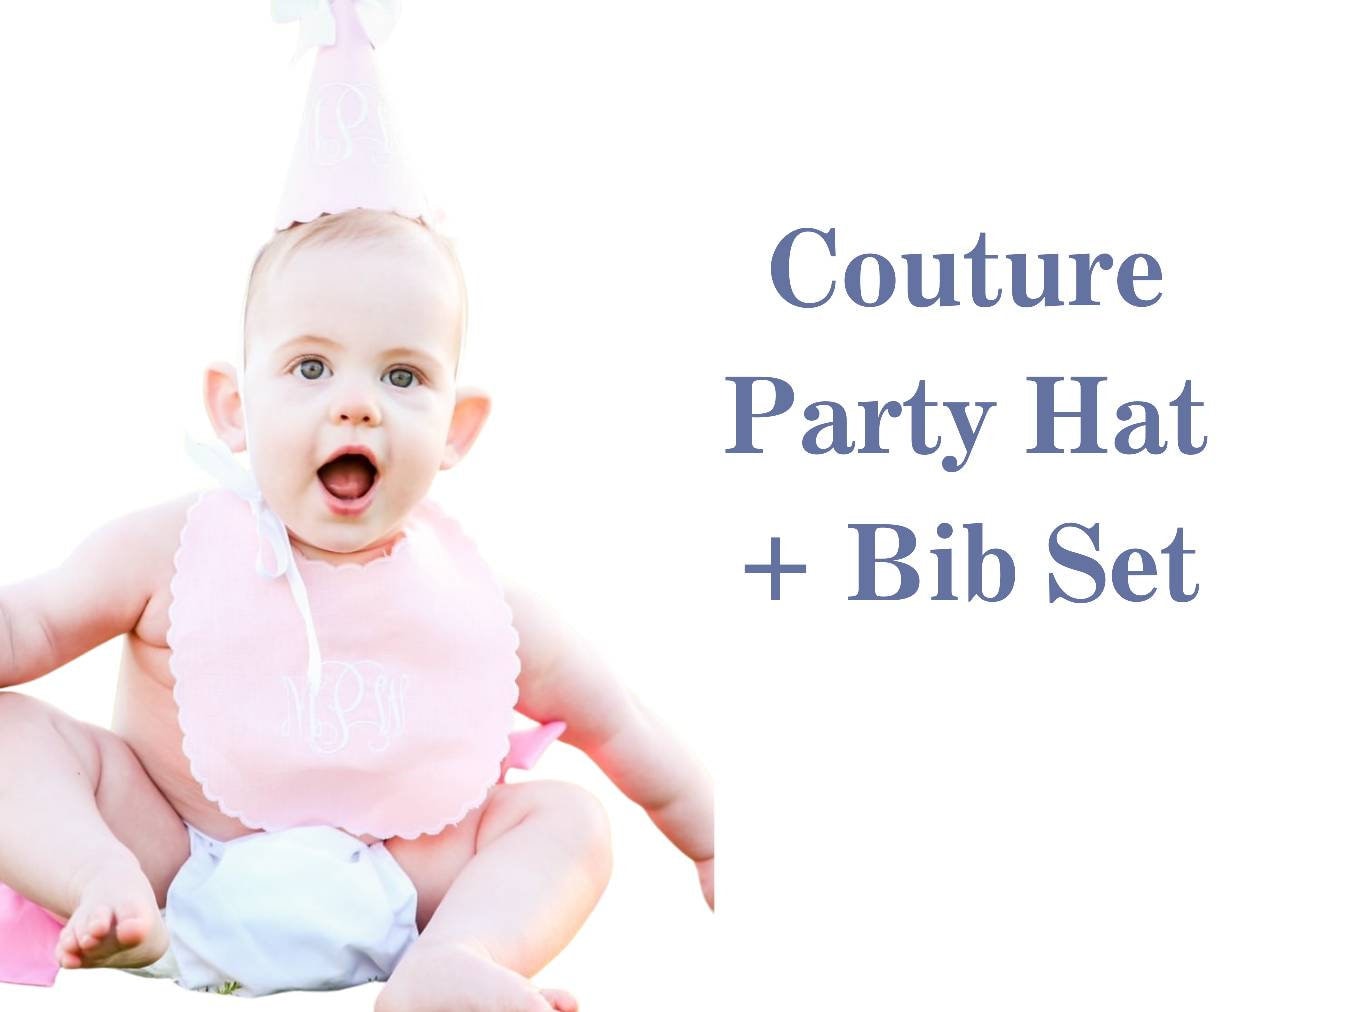 Couture Birthday Party Hat and Bib 2 Piece Set I Custom Keepsake Birthday Party Hat and Hrirloom Bib I Design Your Own Cake Smash Set